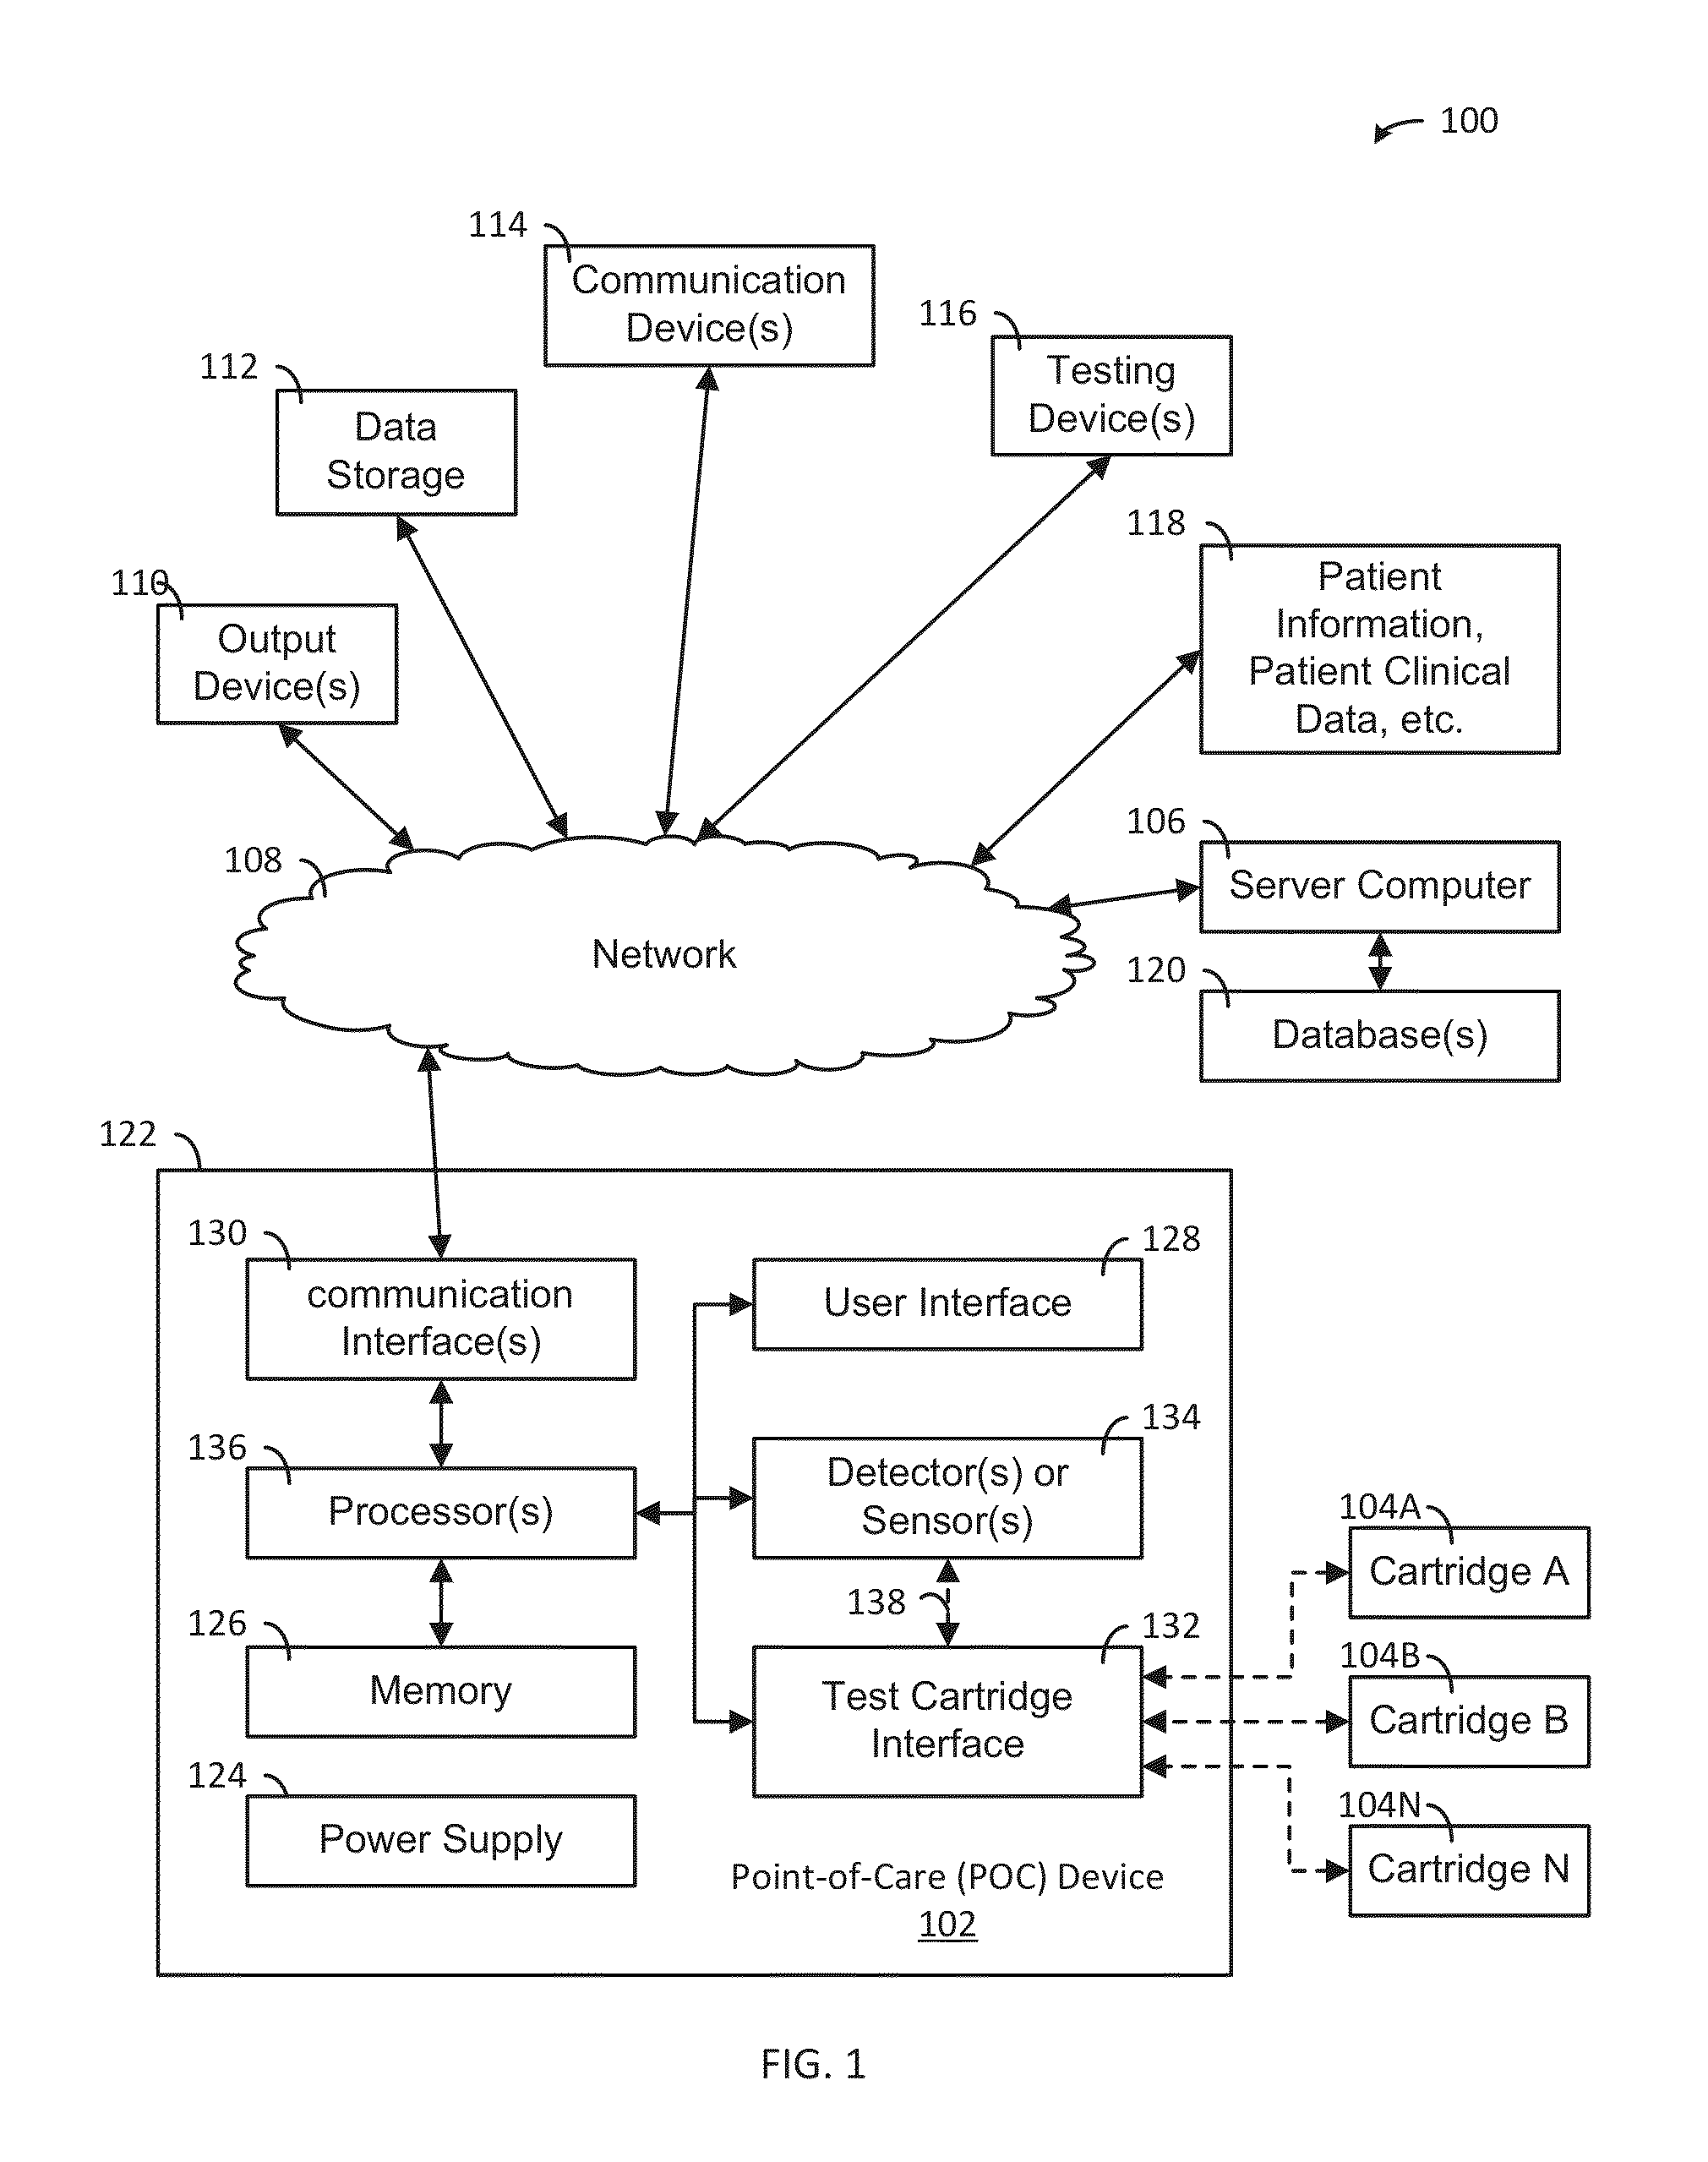 System, Apparatus and Method for Evaluating Samples or Analytes Using a Point-of-Care Device